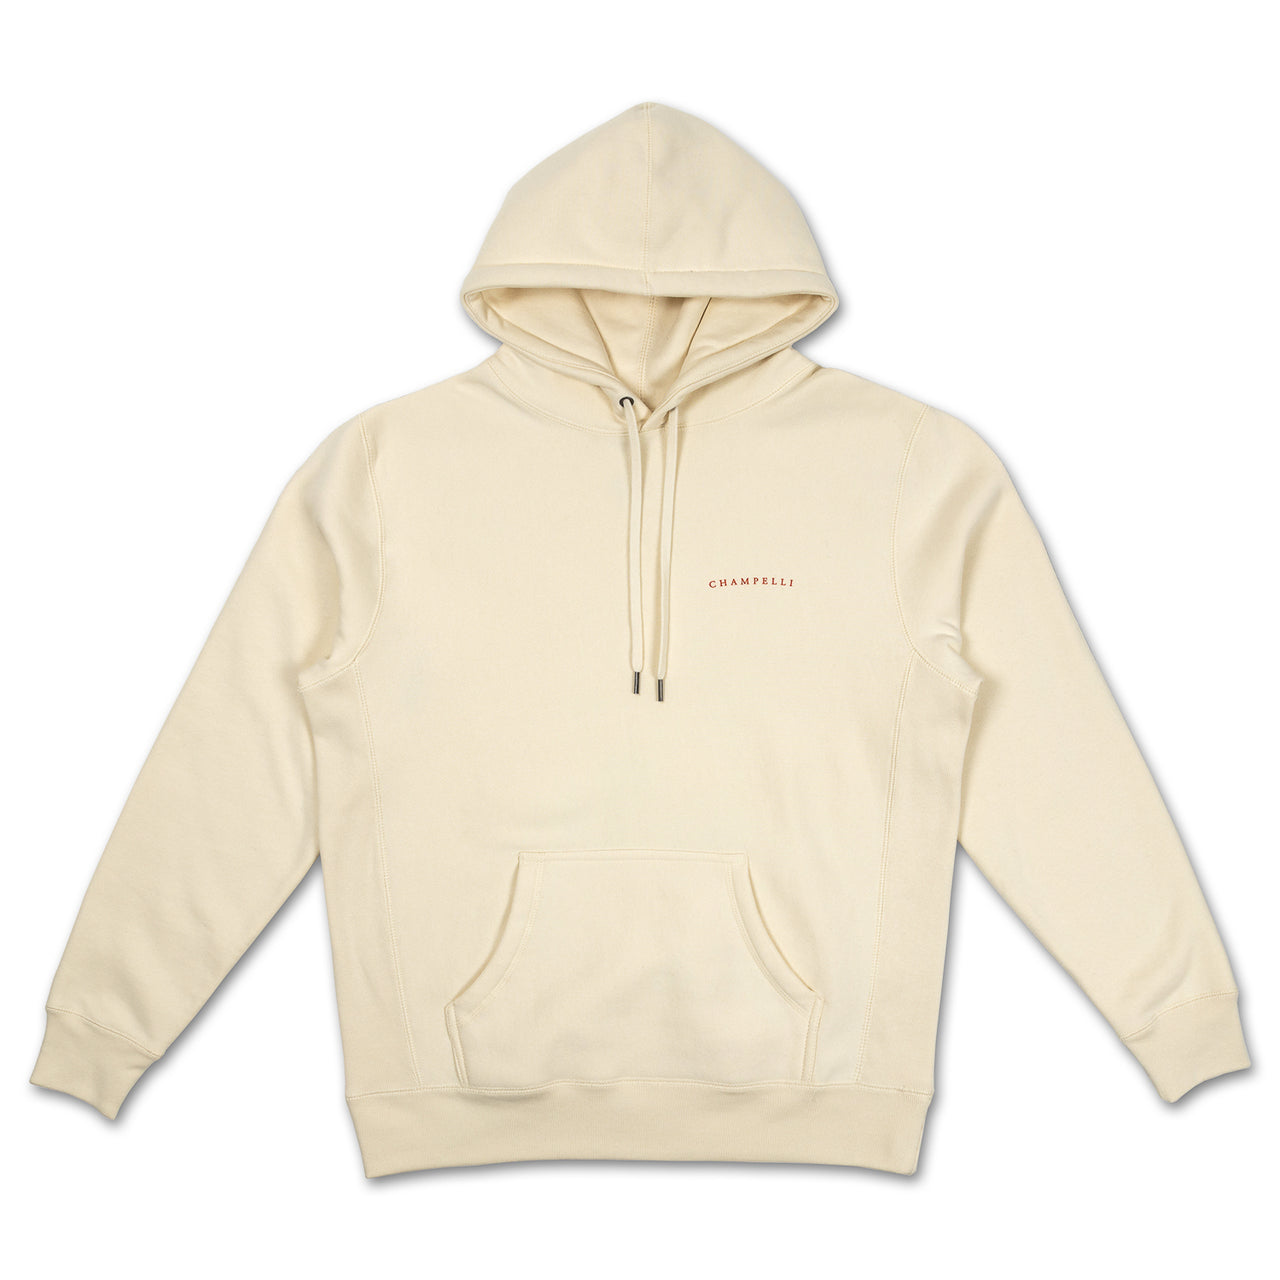 MODIANO HOODIE IN CREAM